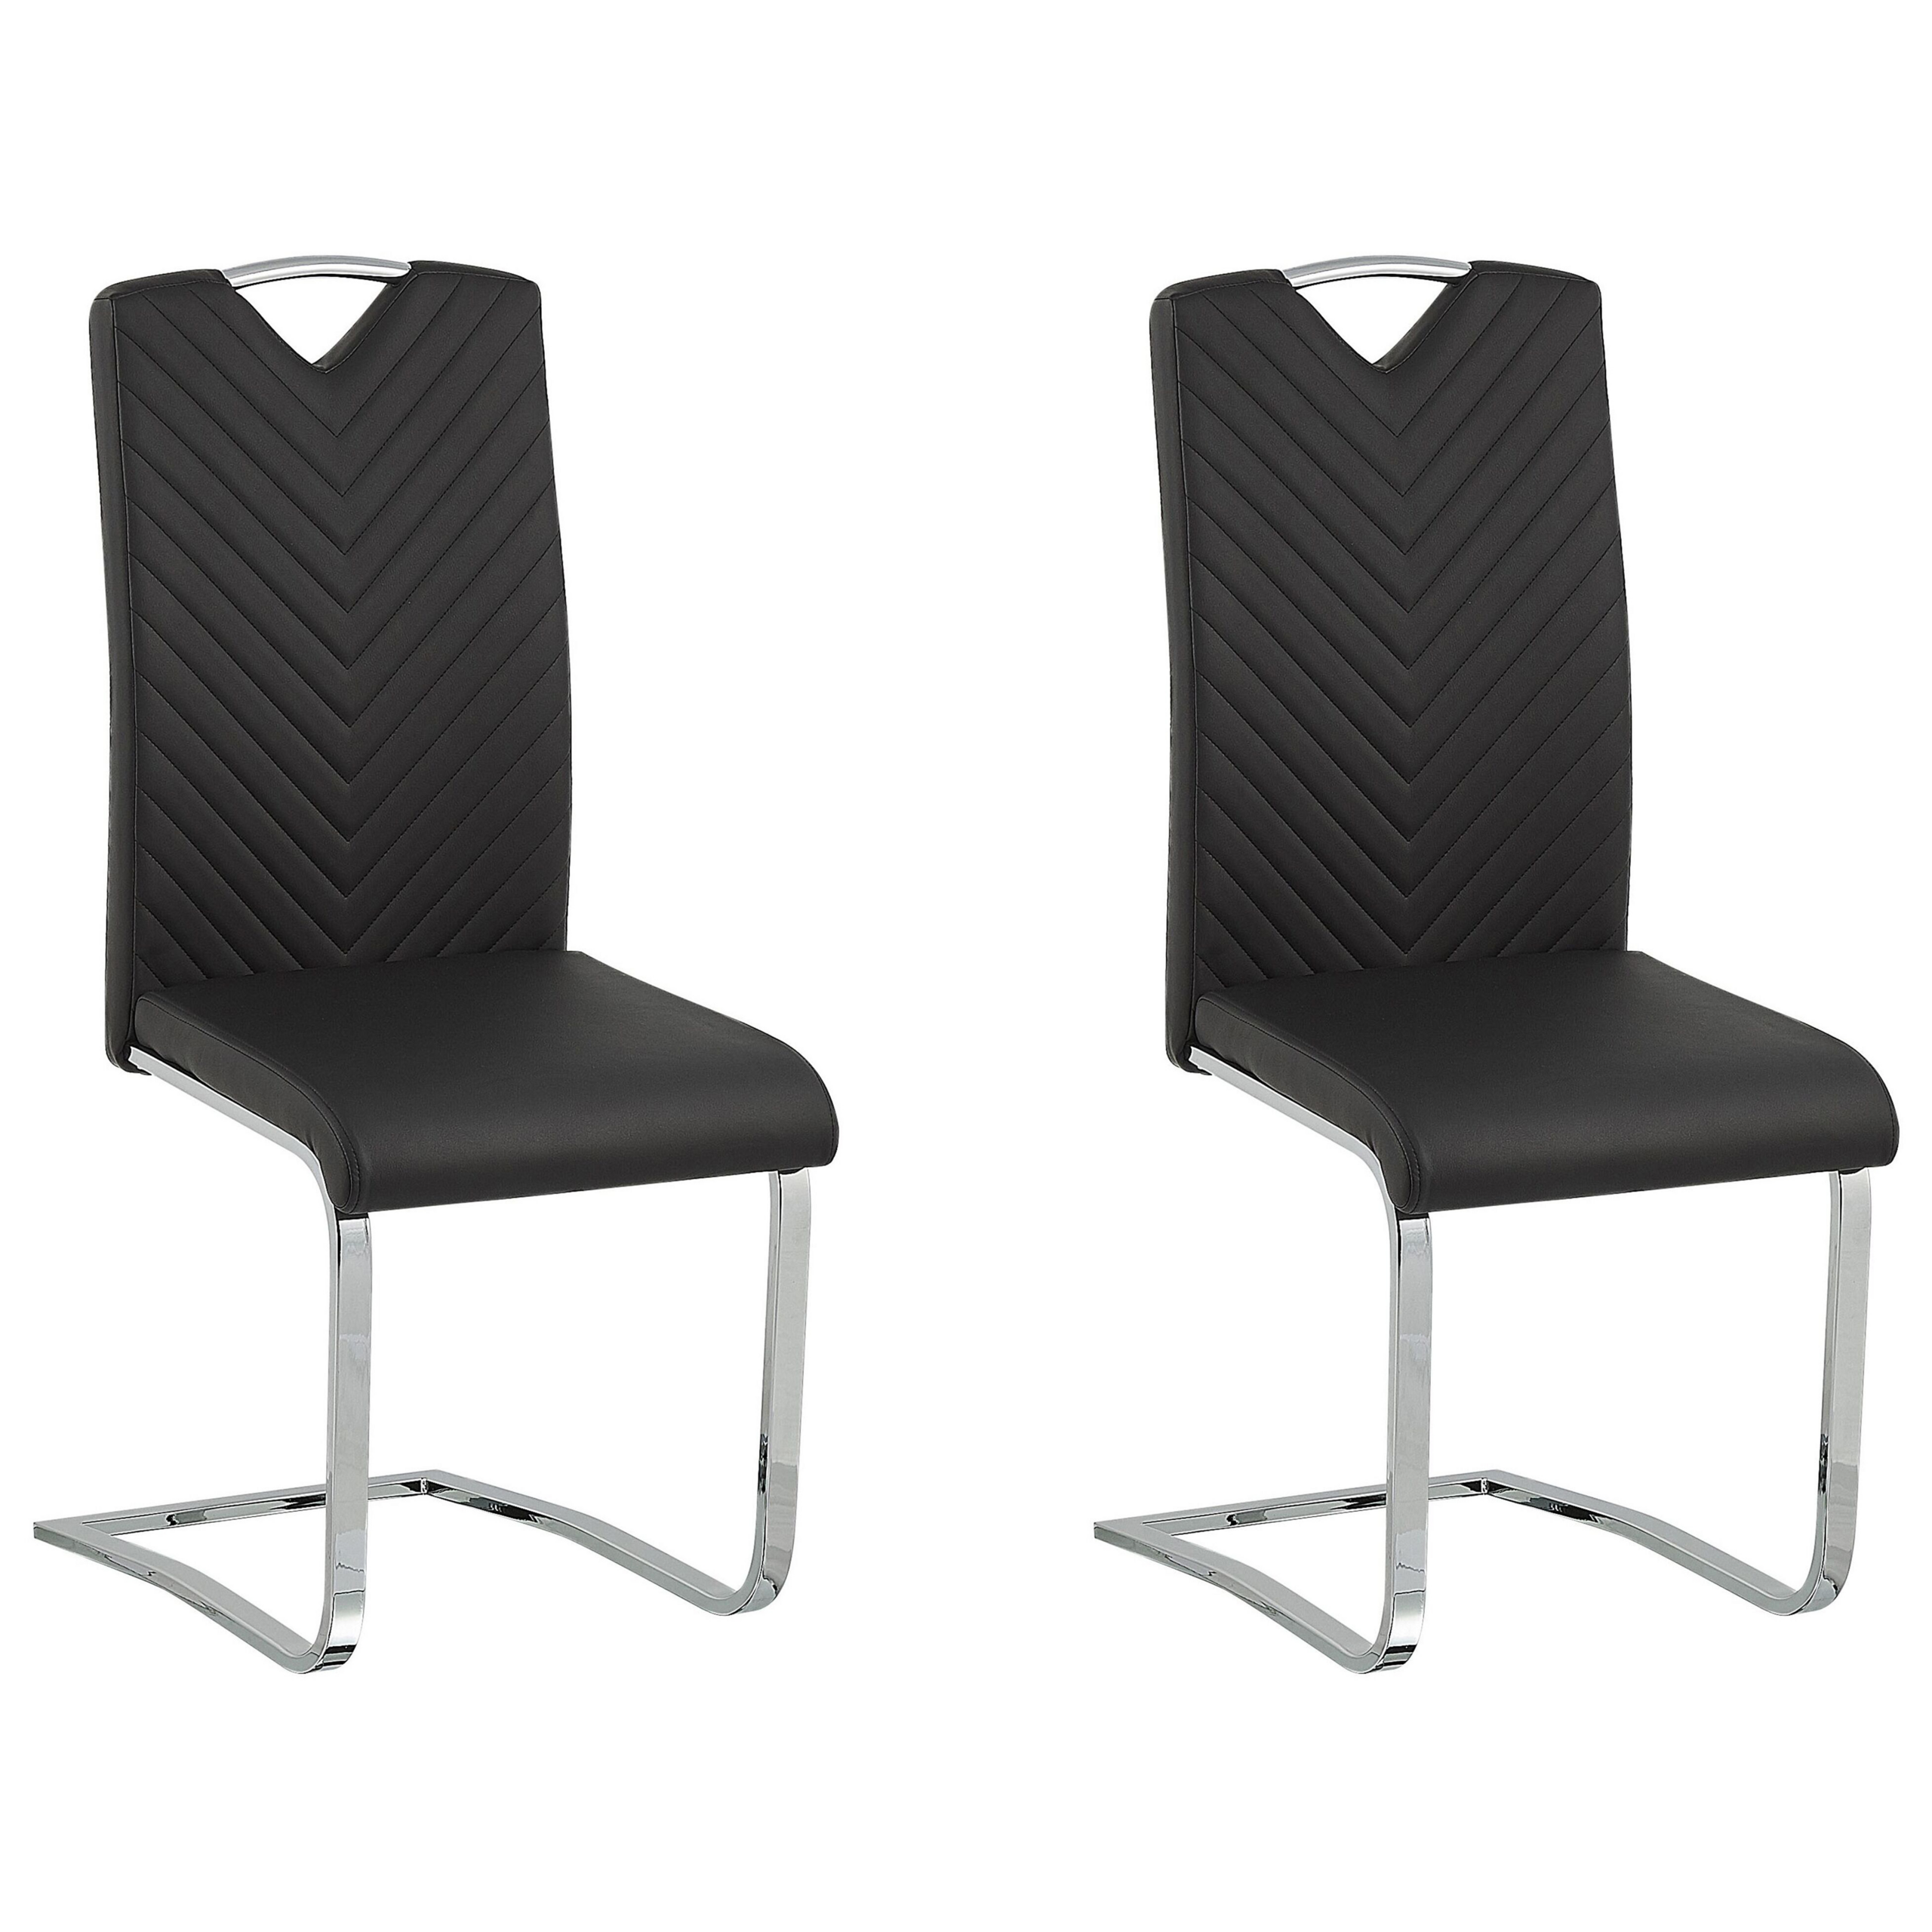 Beliani Set of 2 Dining Chairs Black Faux Leather Upholstered Seat Hight Back Cantilever Conference Room Modern